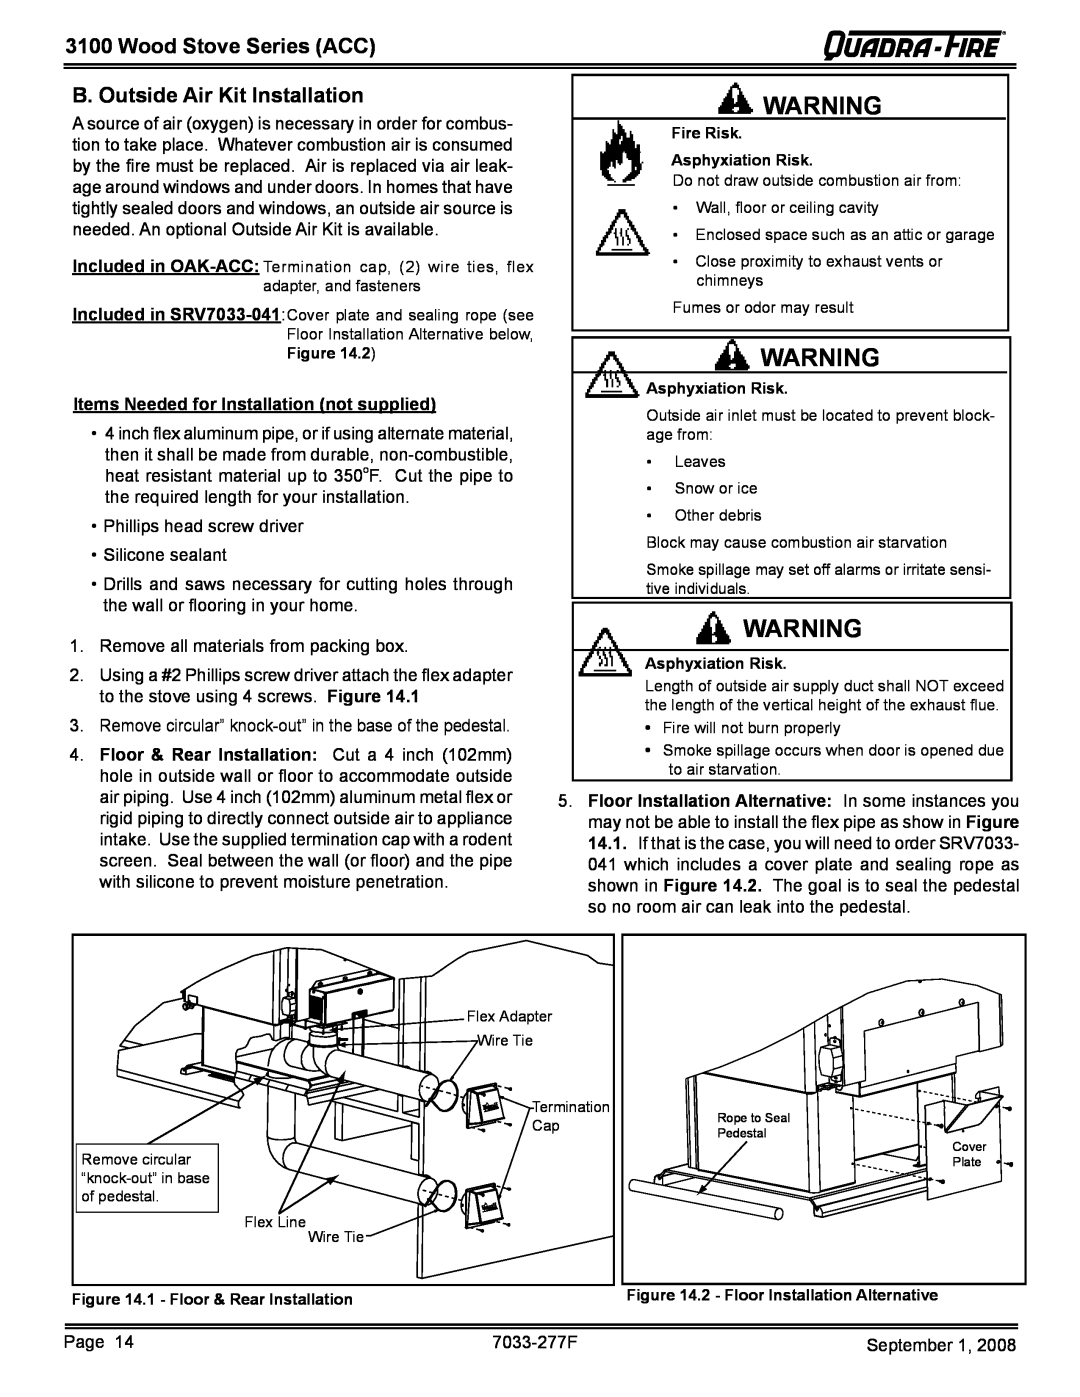 Hearth and Home Technologies 31ST-ACC, 31M-ACC-MBK owner manual B. Outside Air Kit Installation, Wood Stove Series ACC 